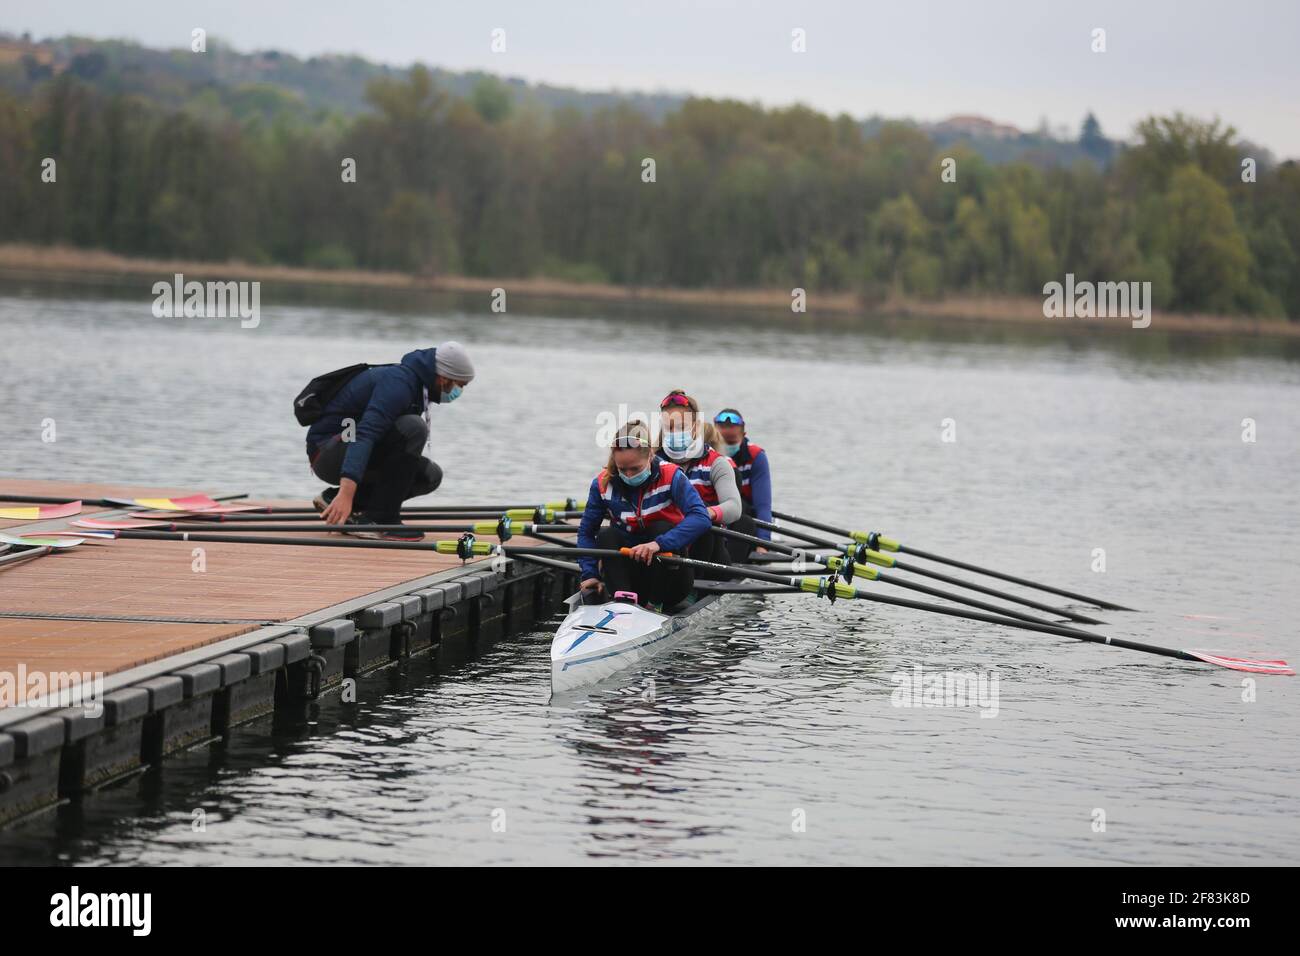 Varese, Italy. 10th Apr, 2021. Women Quadruple Scullers Siri Eva  Kristiansen, Inger Kavlie, Thea Helseth and Maia Lund of Norway training on  Day 2 at the European Rowing Championships in Lake Varese